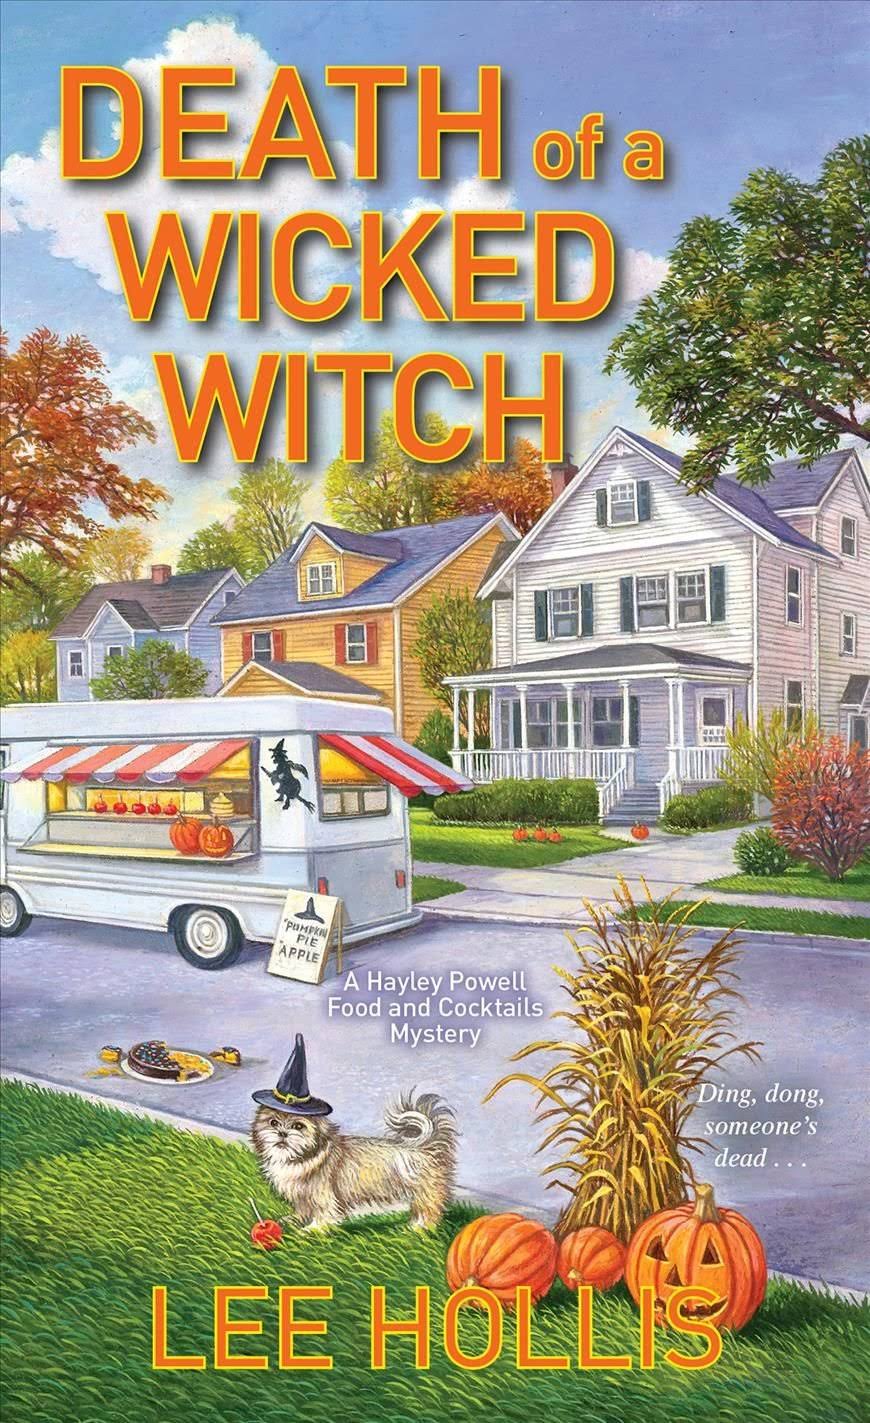 Death of a Wicked Witch [Book]